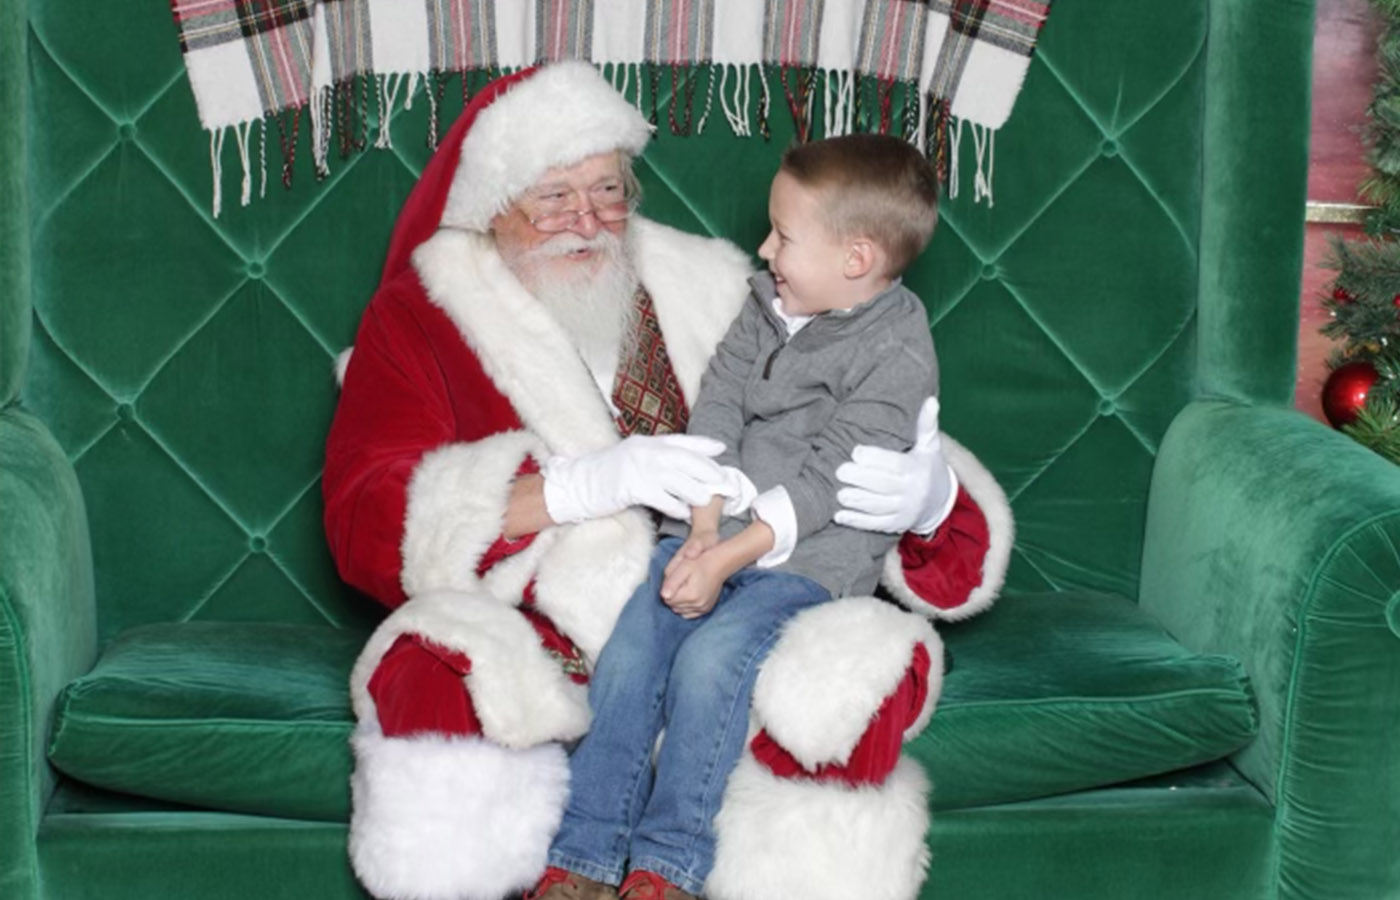 3-year-old's reaction to gift from Santa goes viral - CBS News